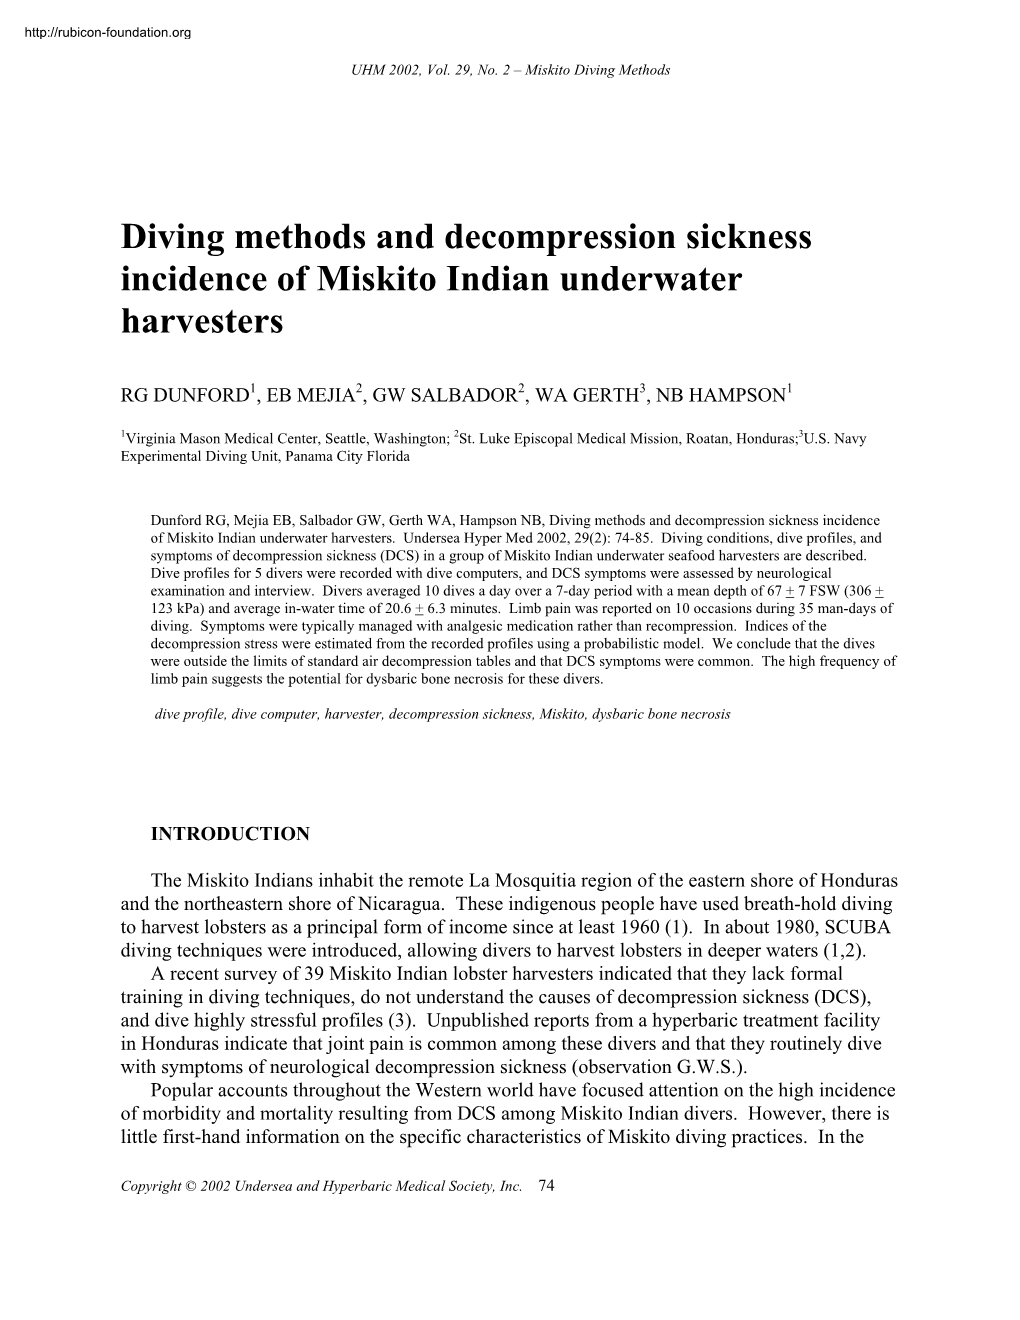 Diving and DCS in Miskito Indigenous Peoples 1MB (2002) Harvest Management